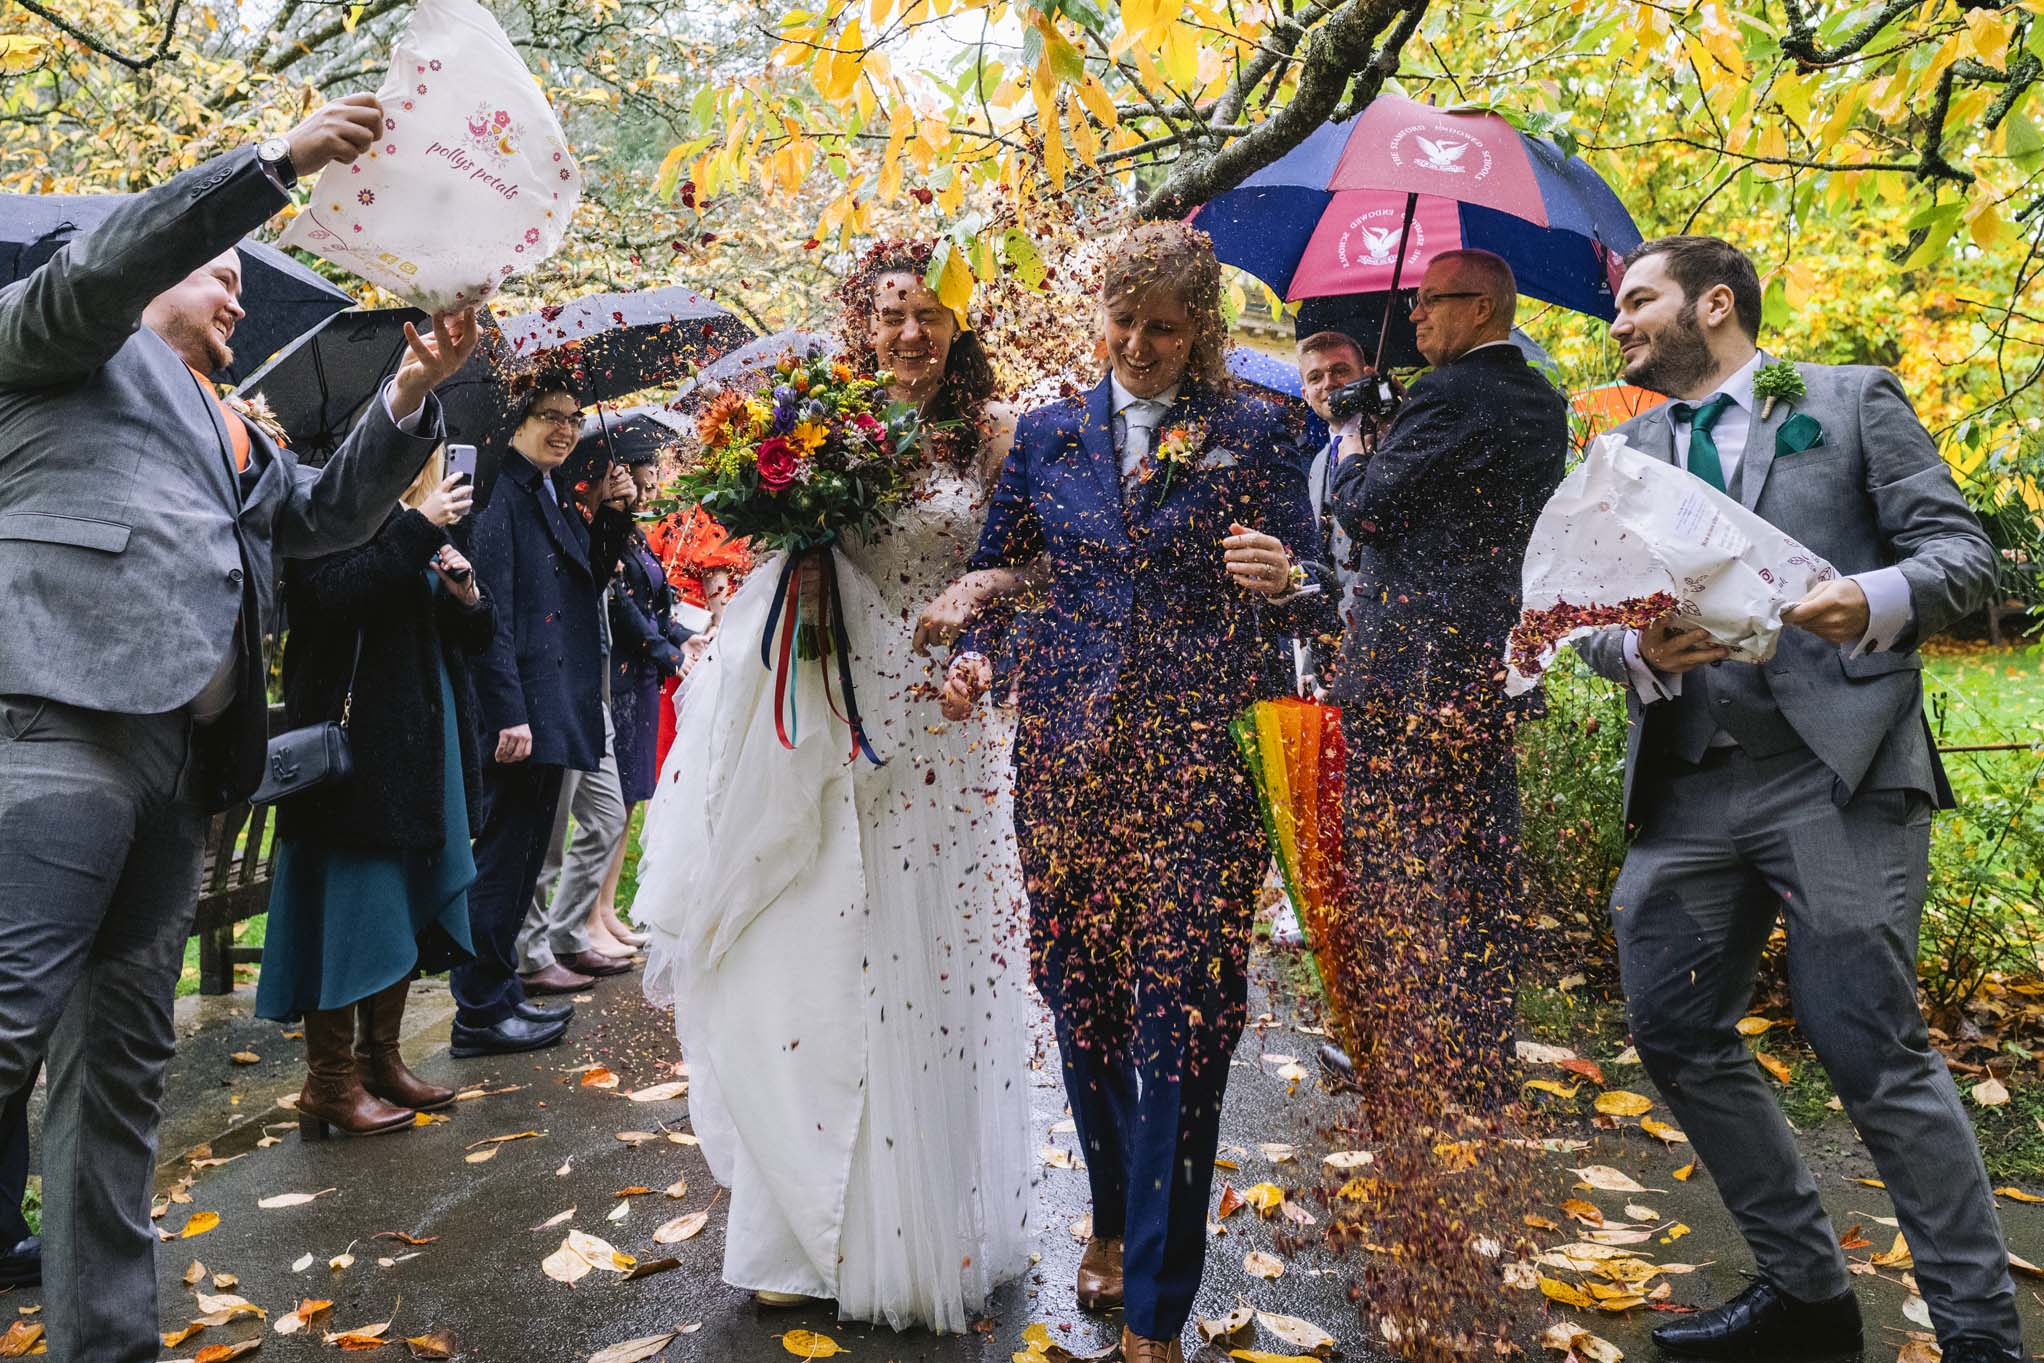 Confetti being thrown on a rainy day